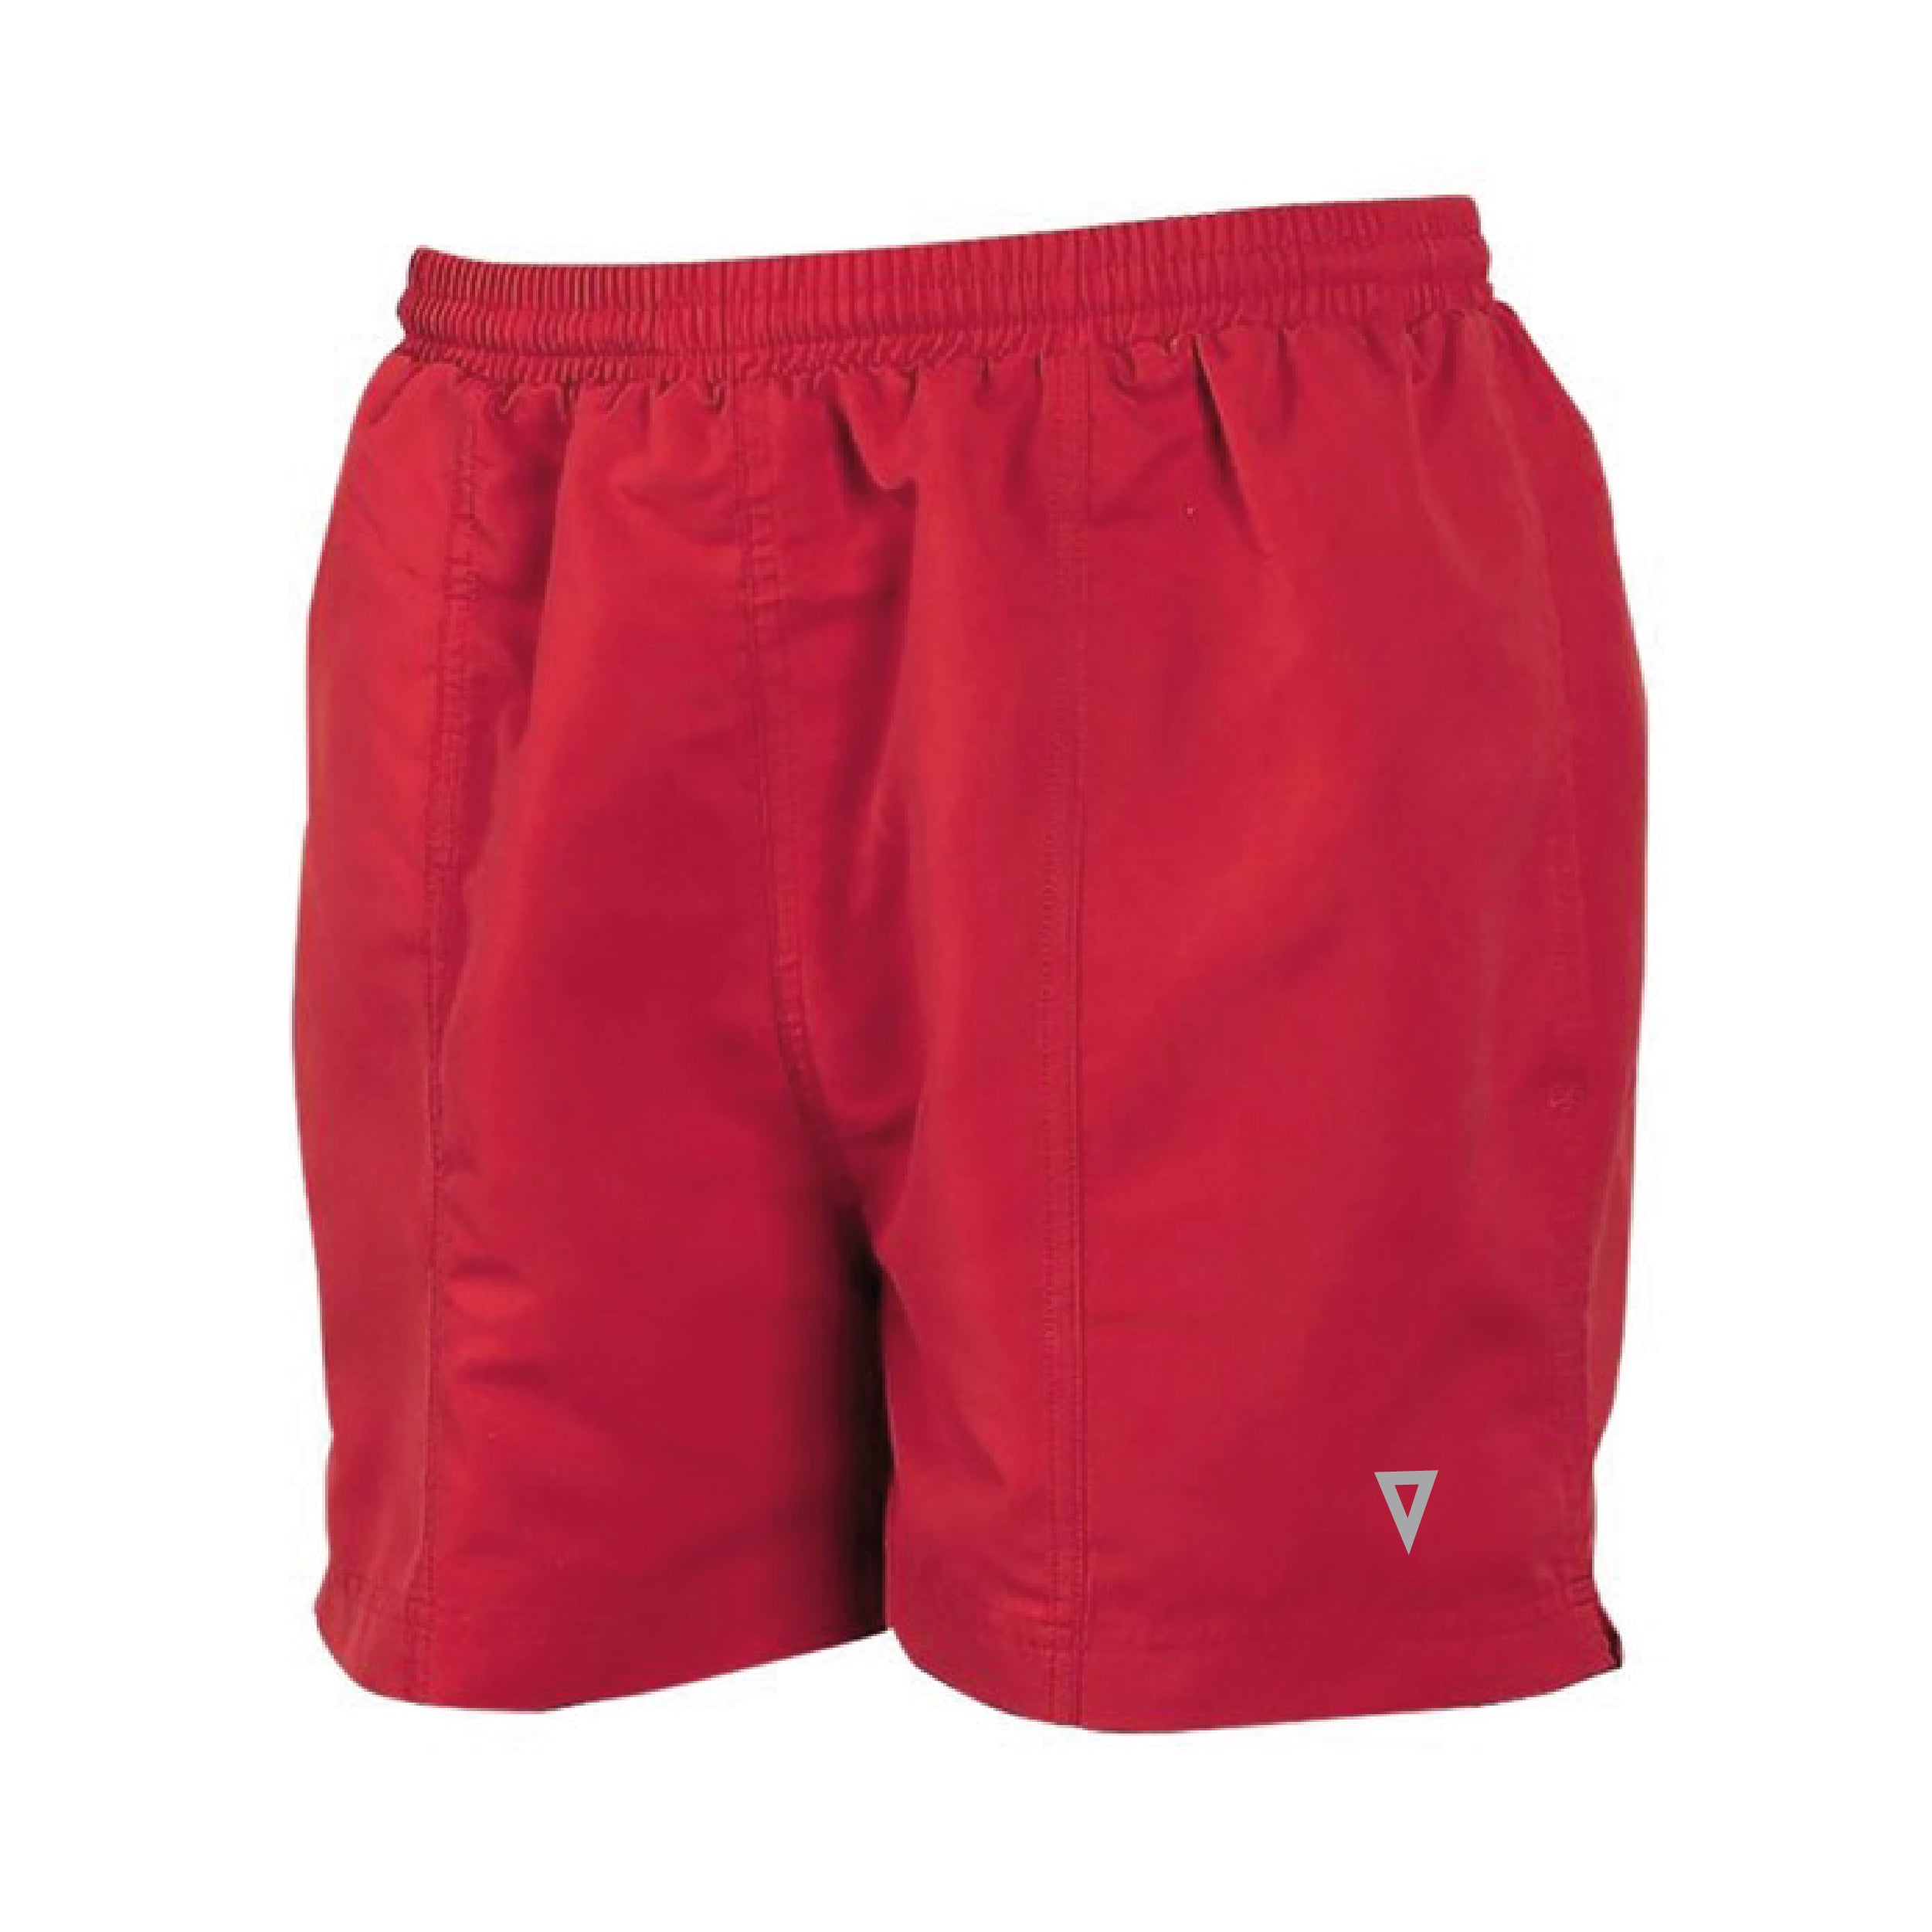 Validate Performance Shorts Red